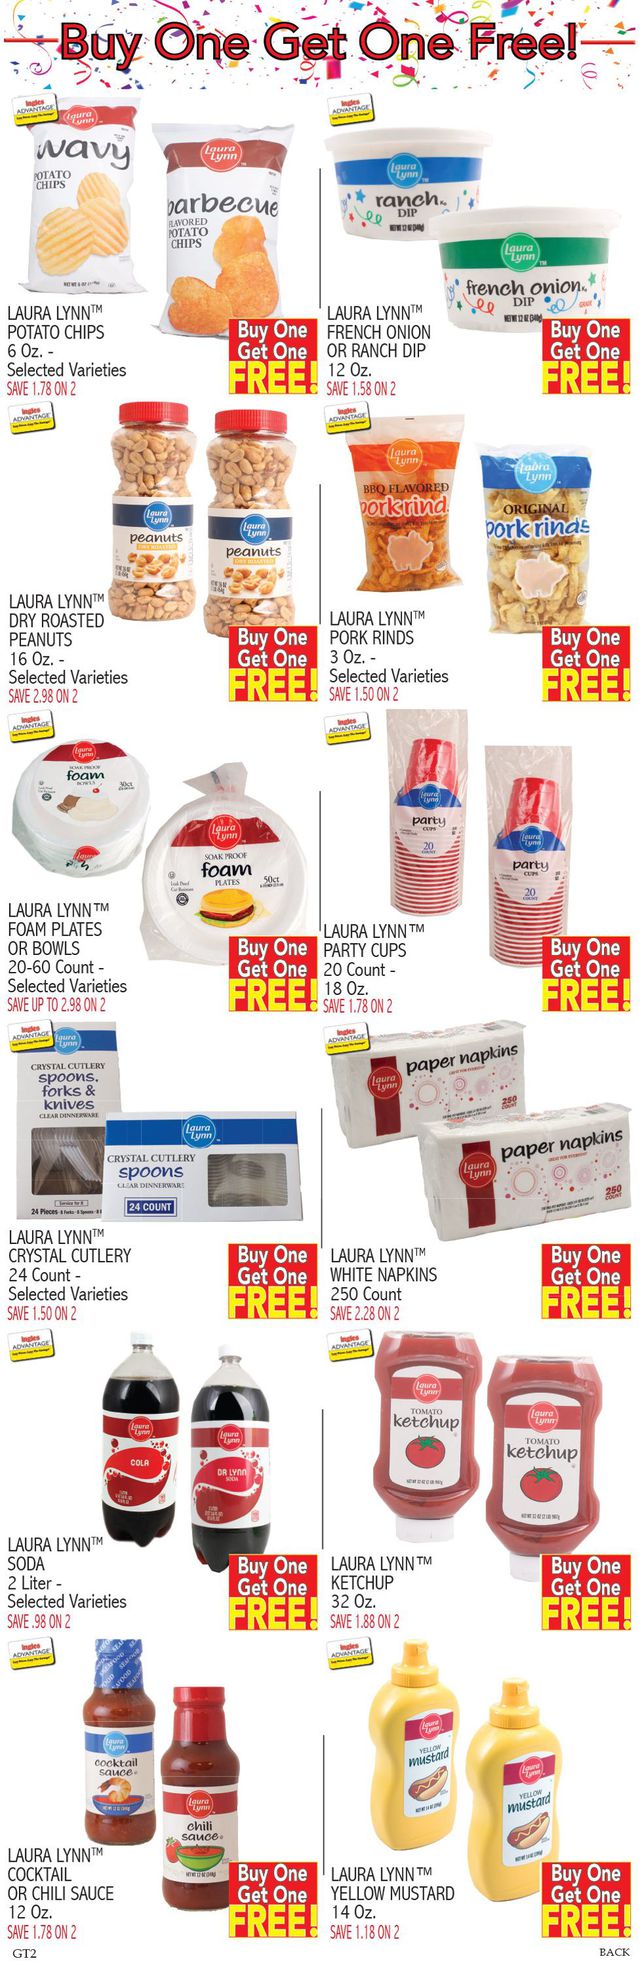 Ingles Ad from 02/03/2021